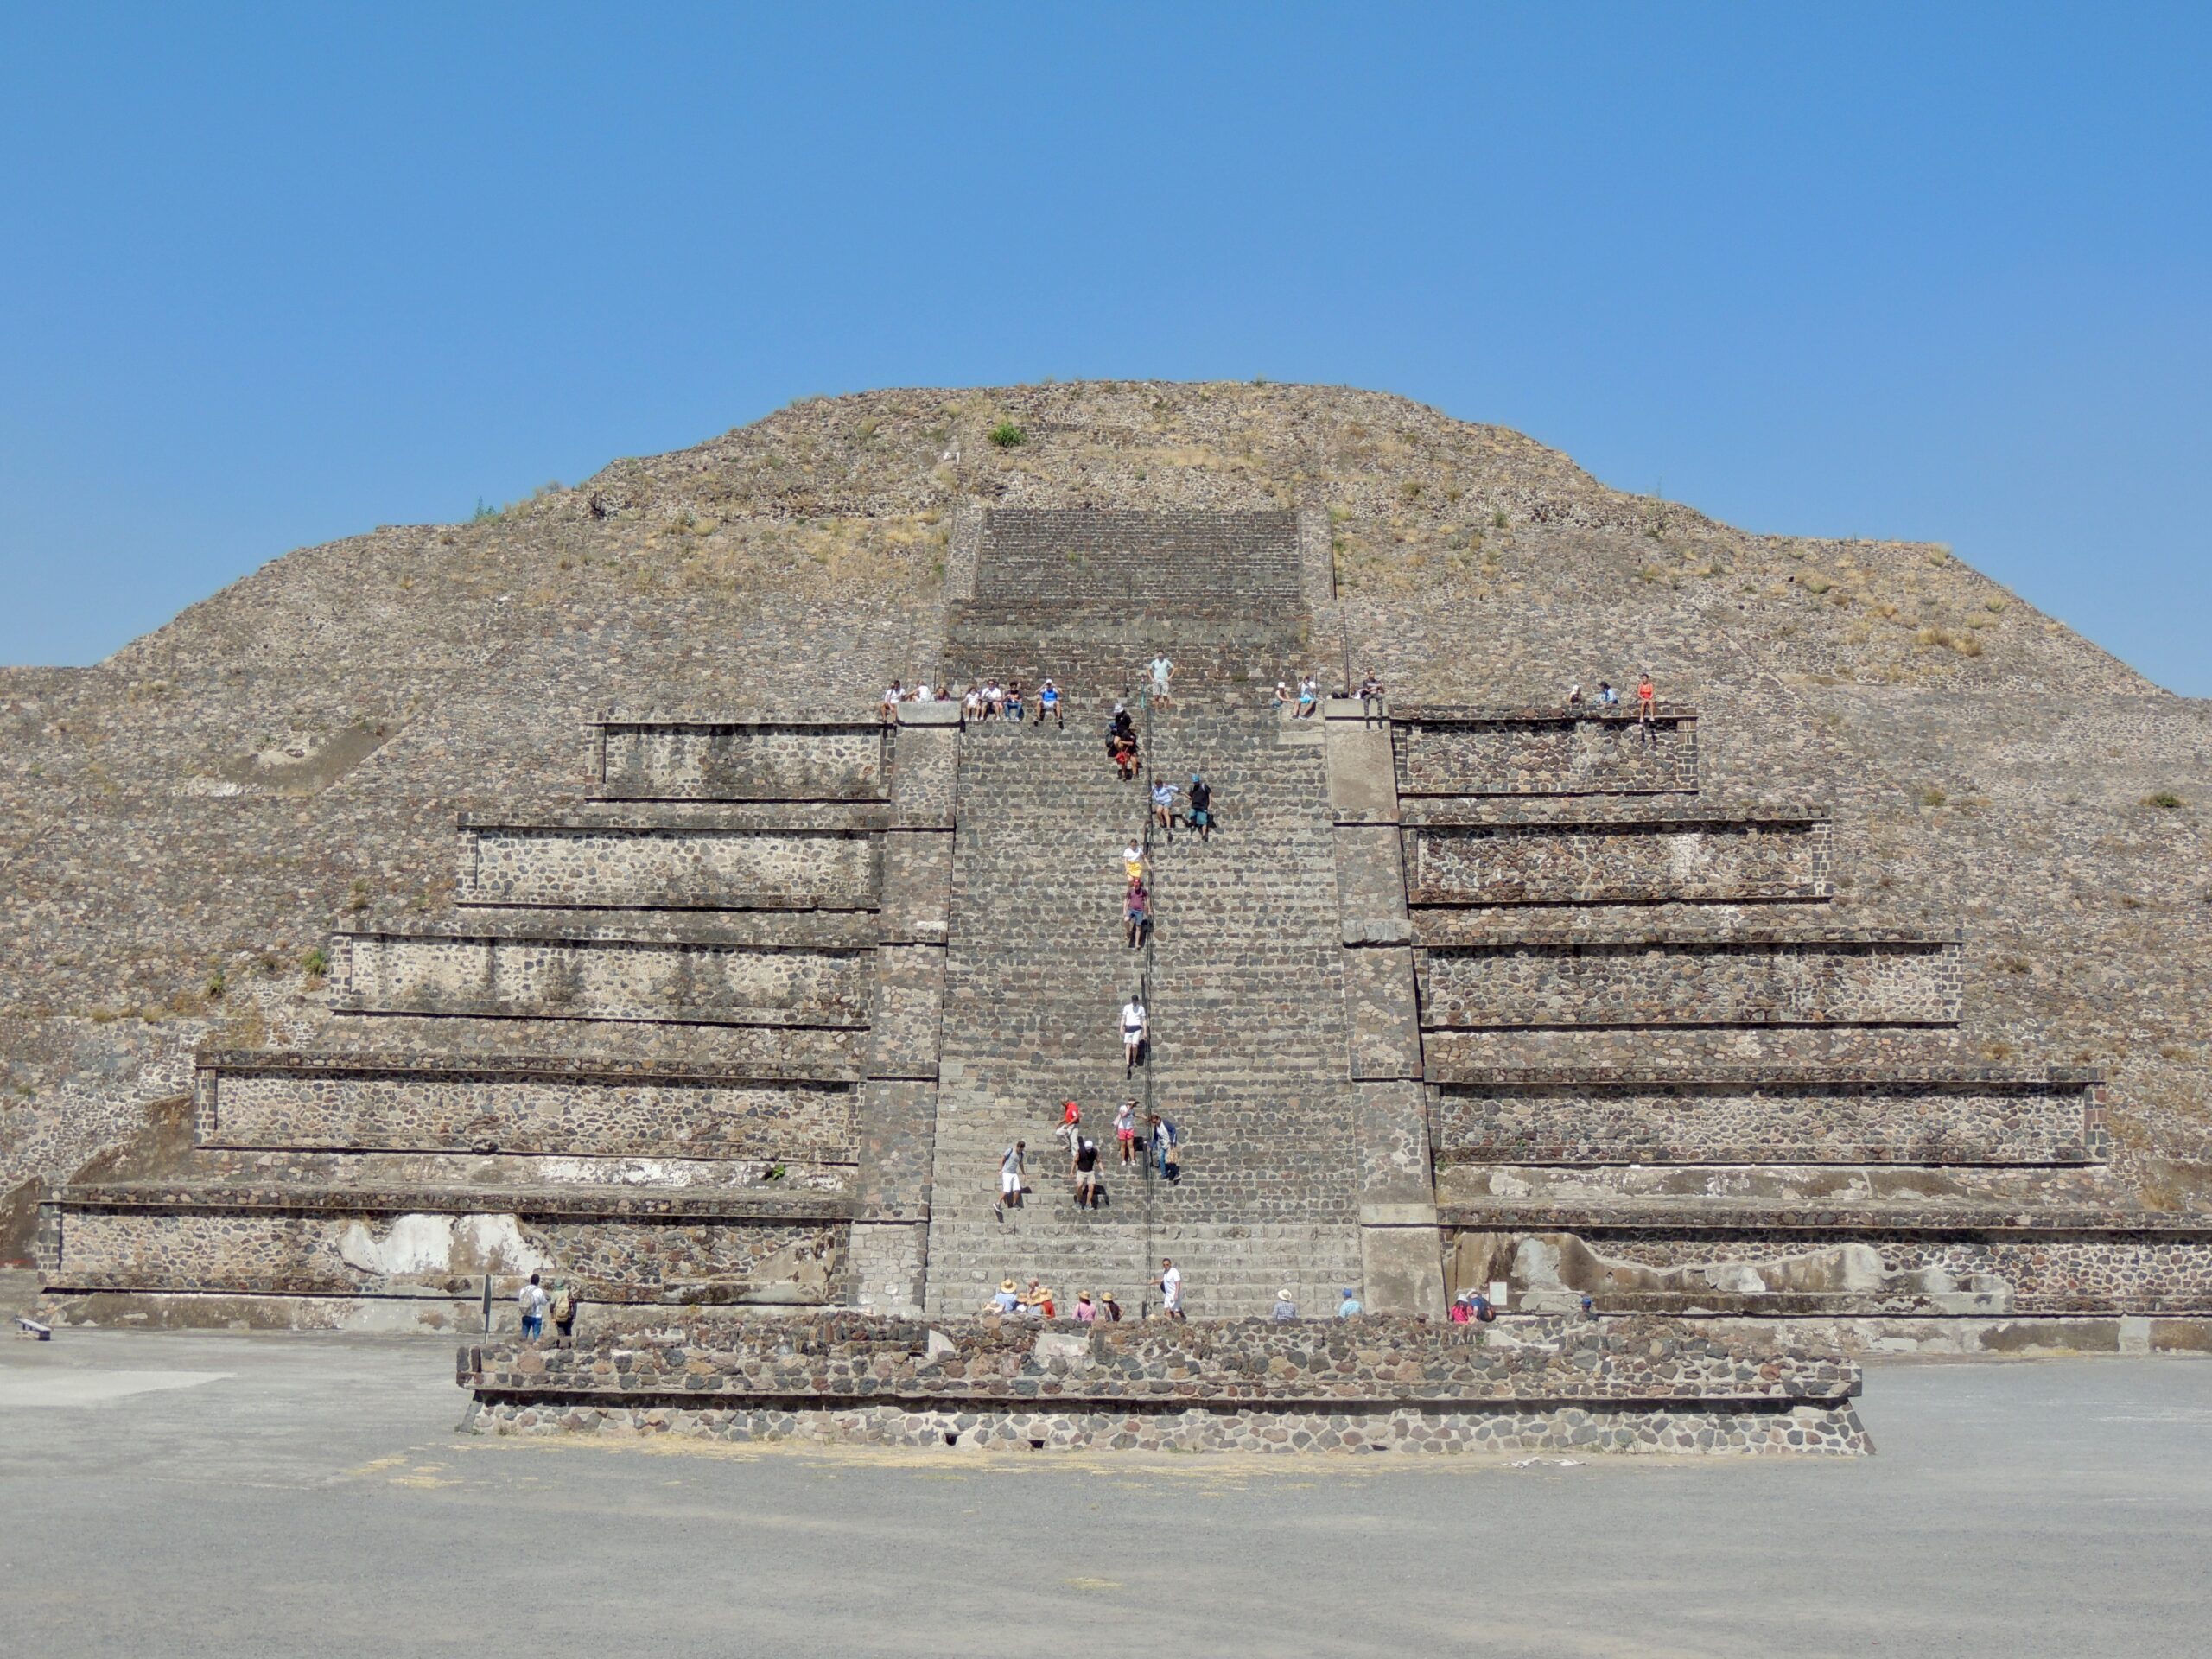 The Pyramid of the Sun is the most popular structure in the ancient city of Teotihuacán. 
pictured: The Pyramid of the Sun with visitors walking up the steep stairs of the pyramid 